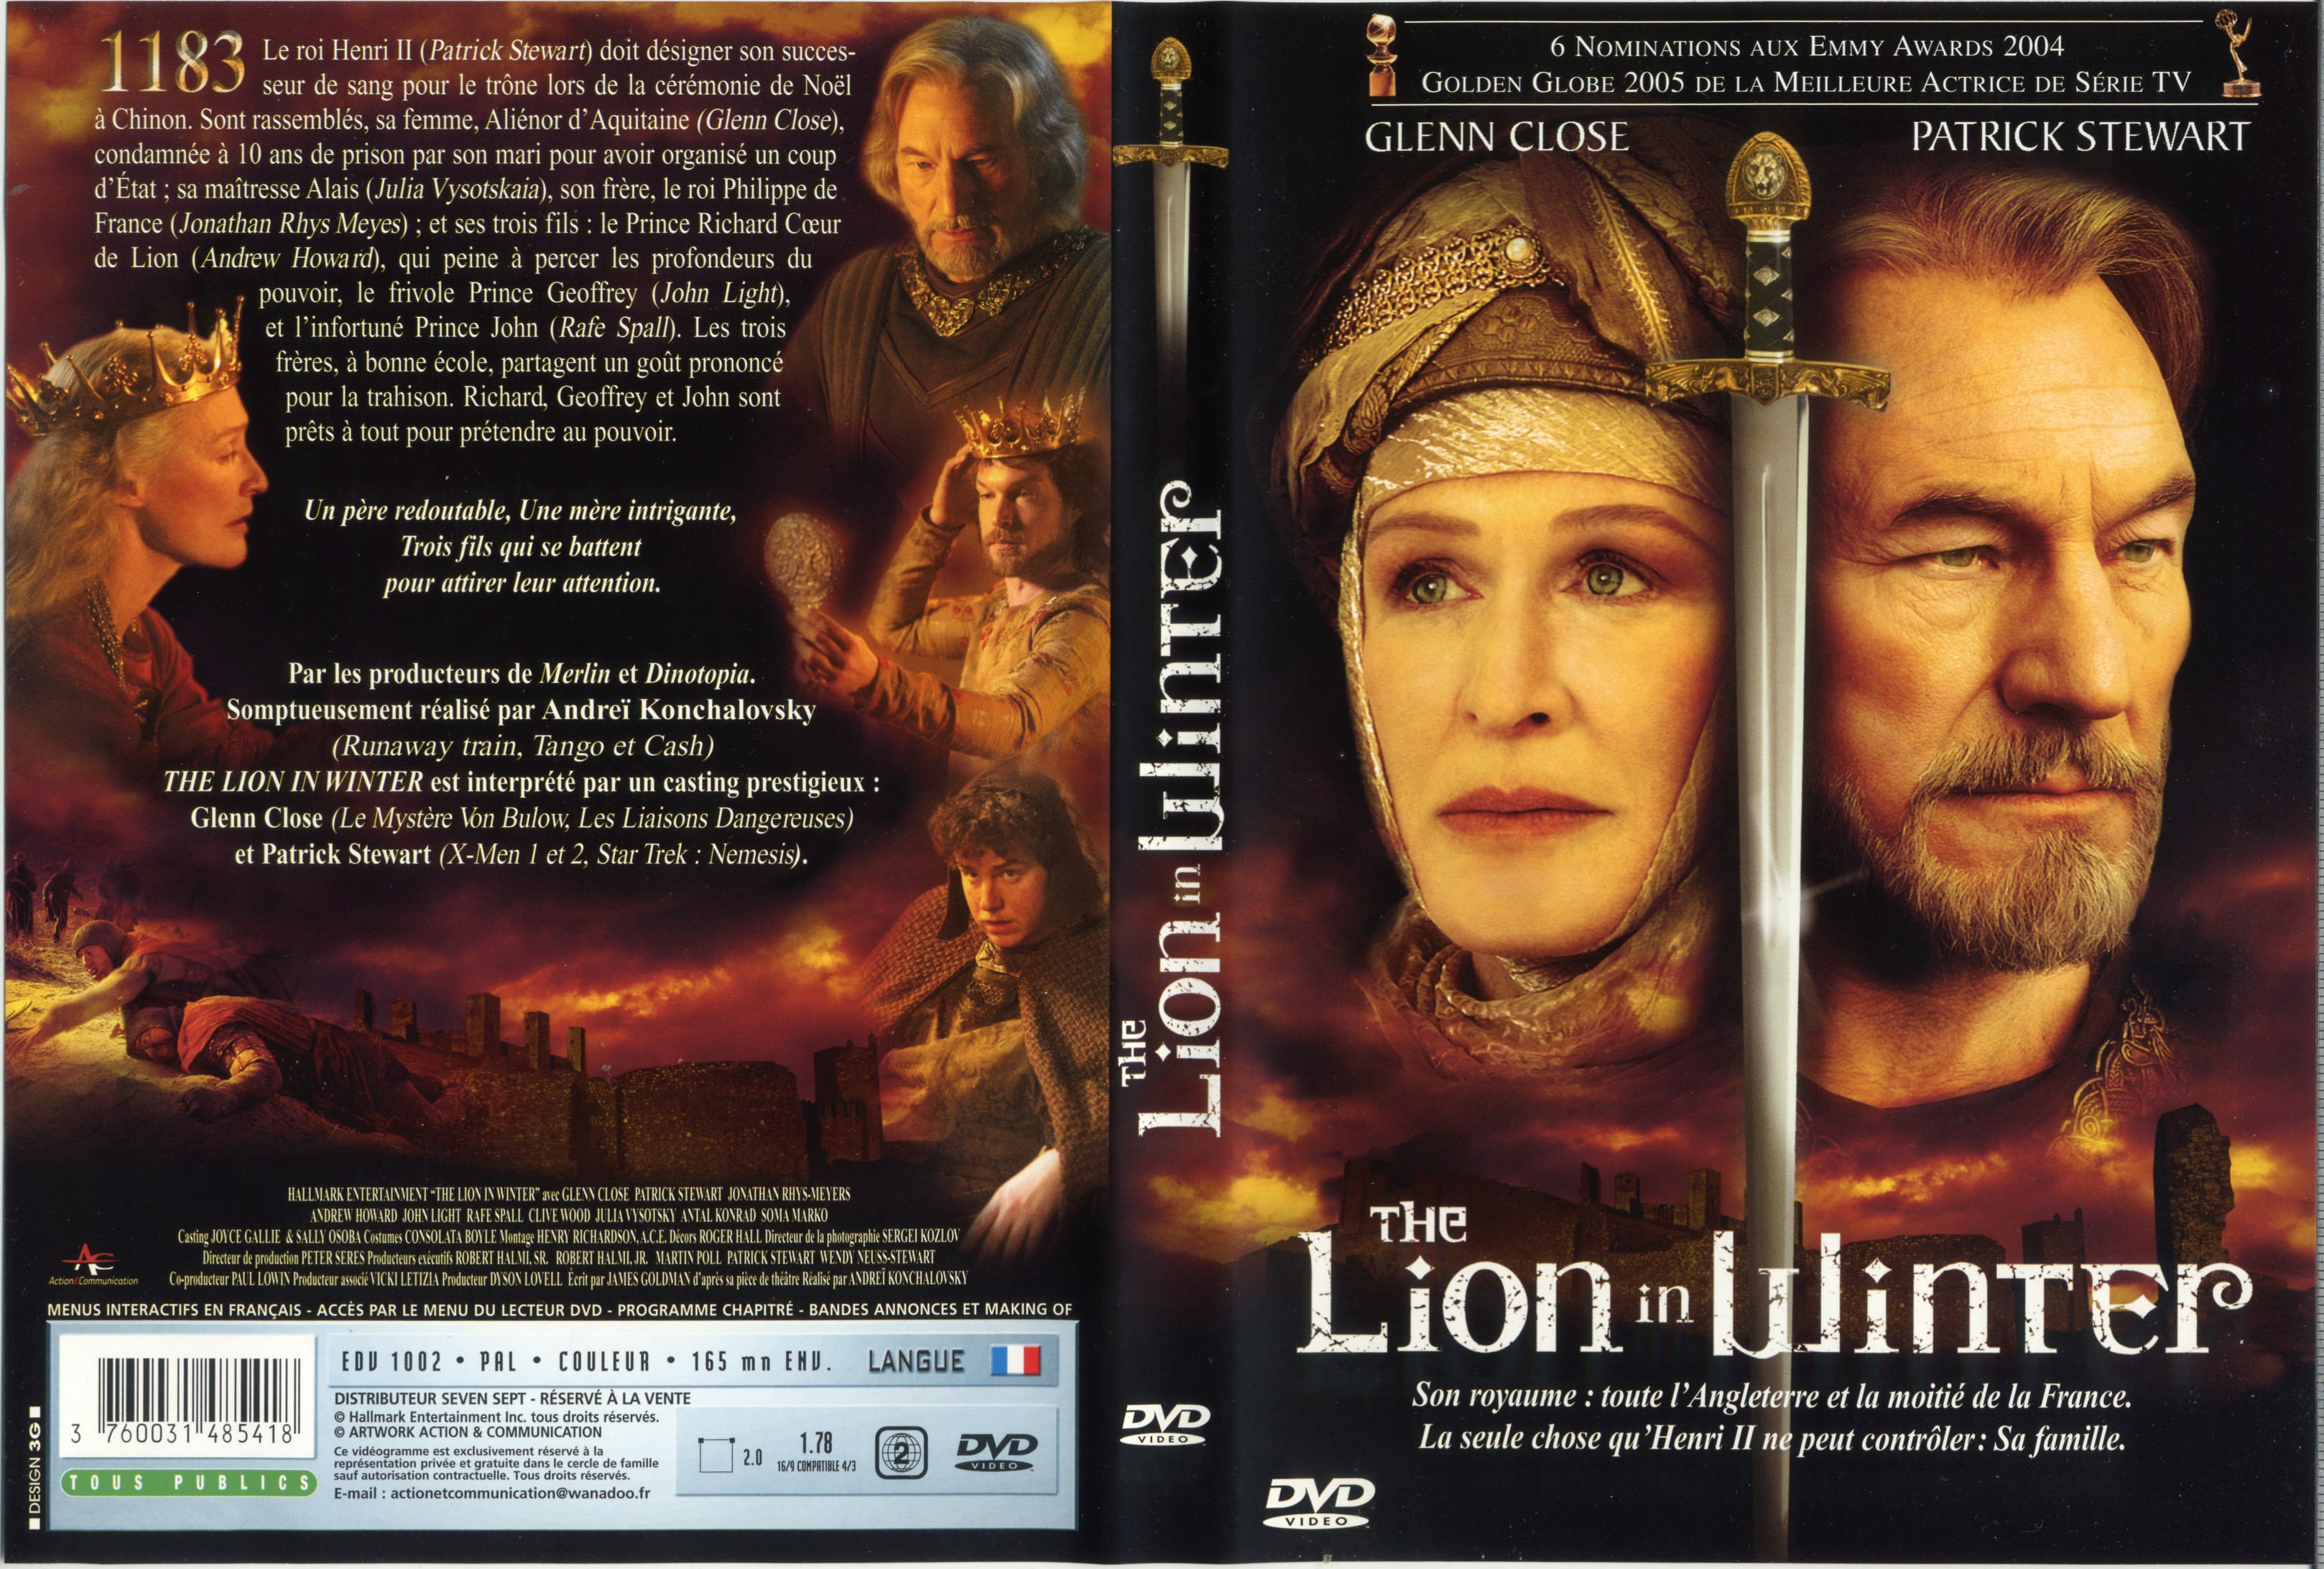 Jaquette DVD The lion in winter